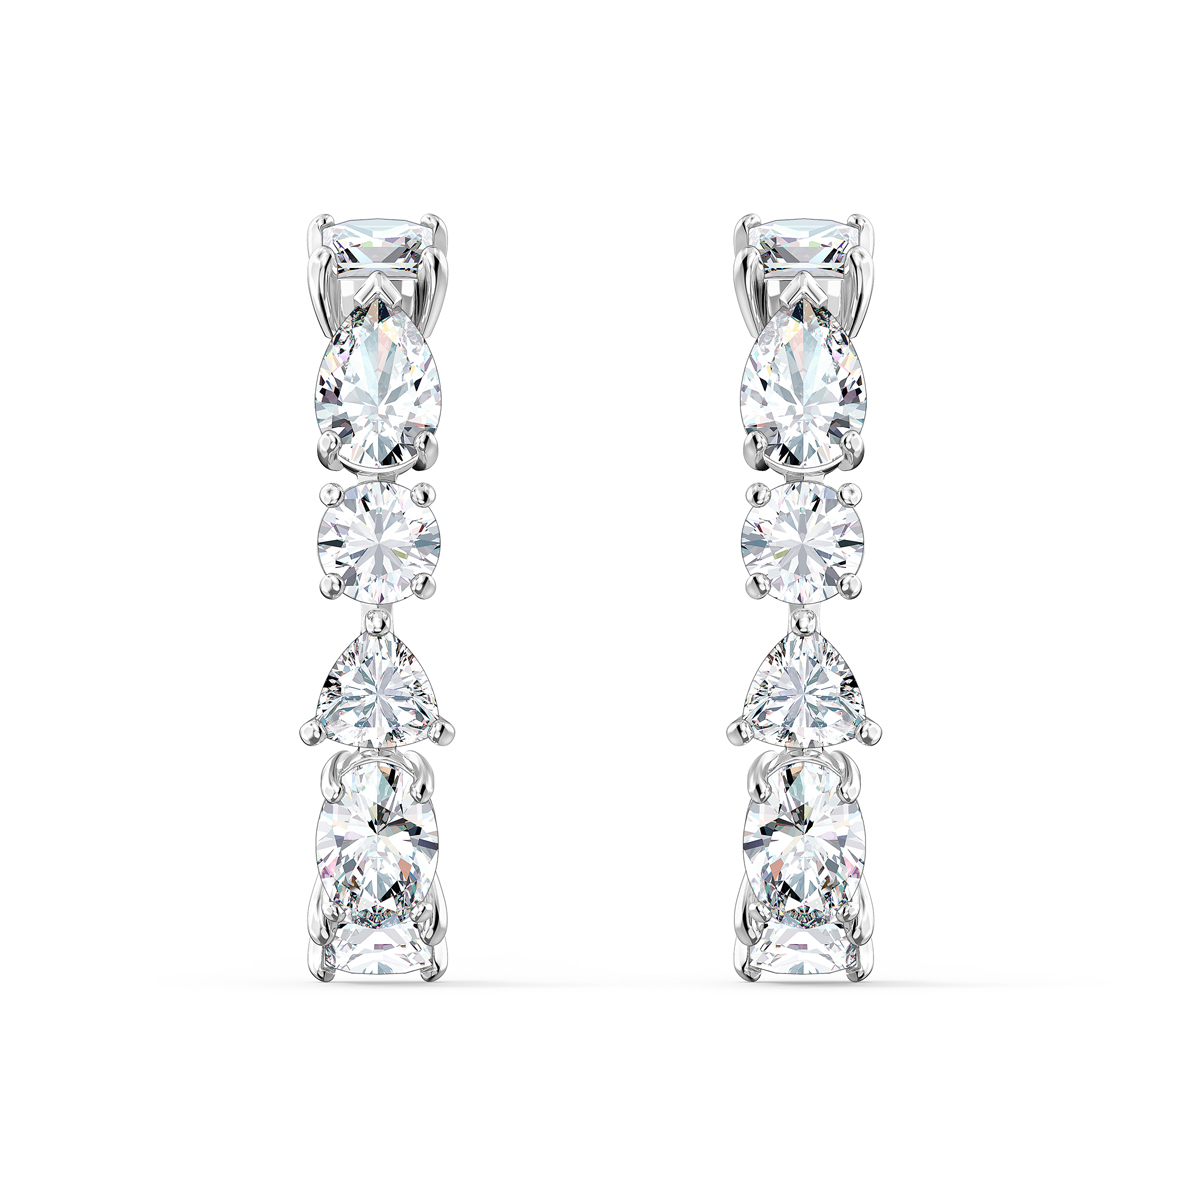 Swarovski Tennis Deluxe White Crystal and Rhodium Plated Pierced Earrings Pair